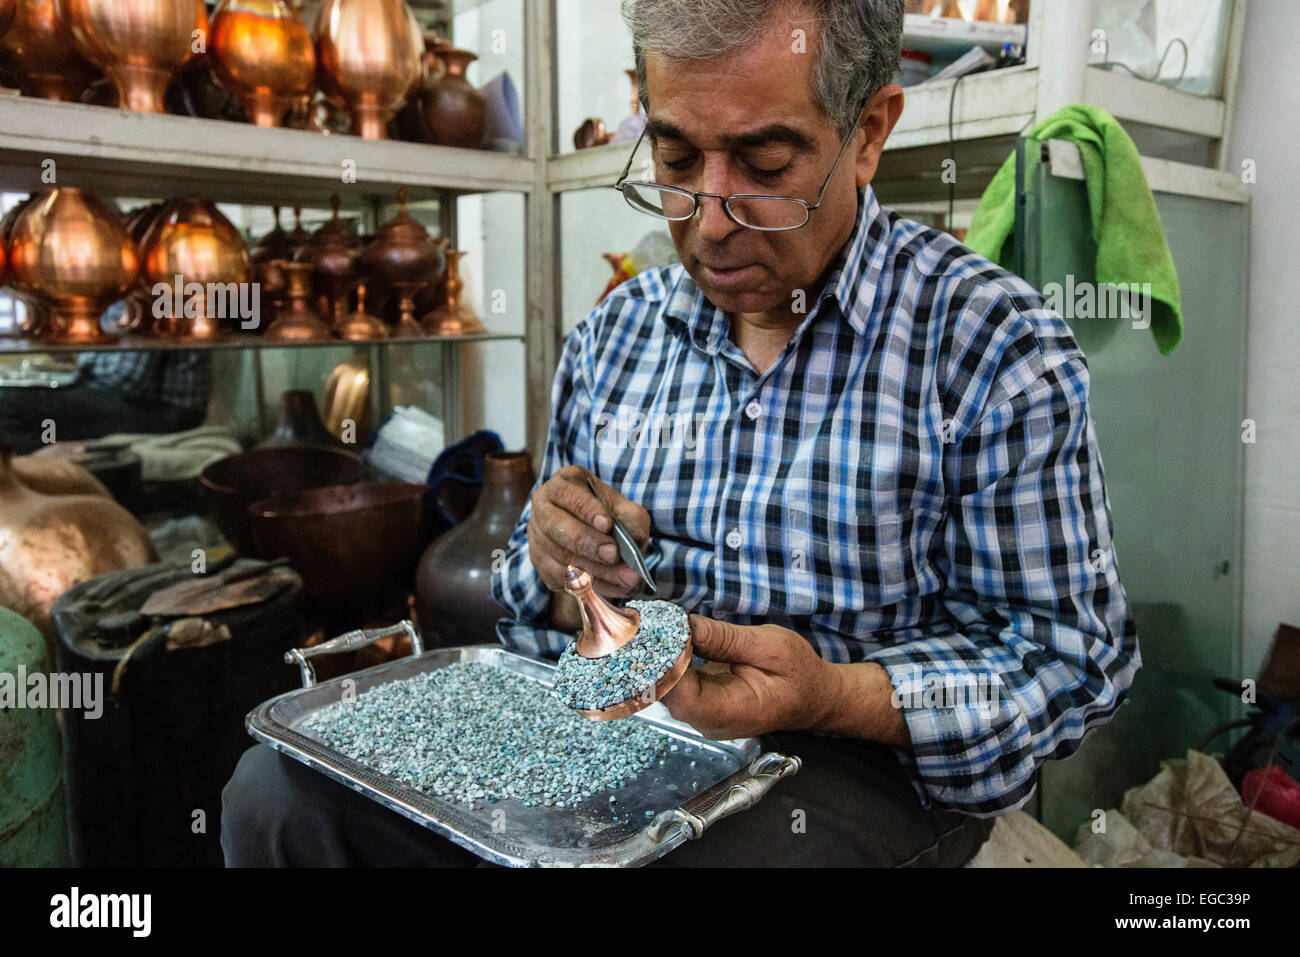 Artist sets mina stones for minakari, unique art of Esfahan, which means decorating metals with colorful and baked coats, Esfahan, Iran Stock Photo